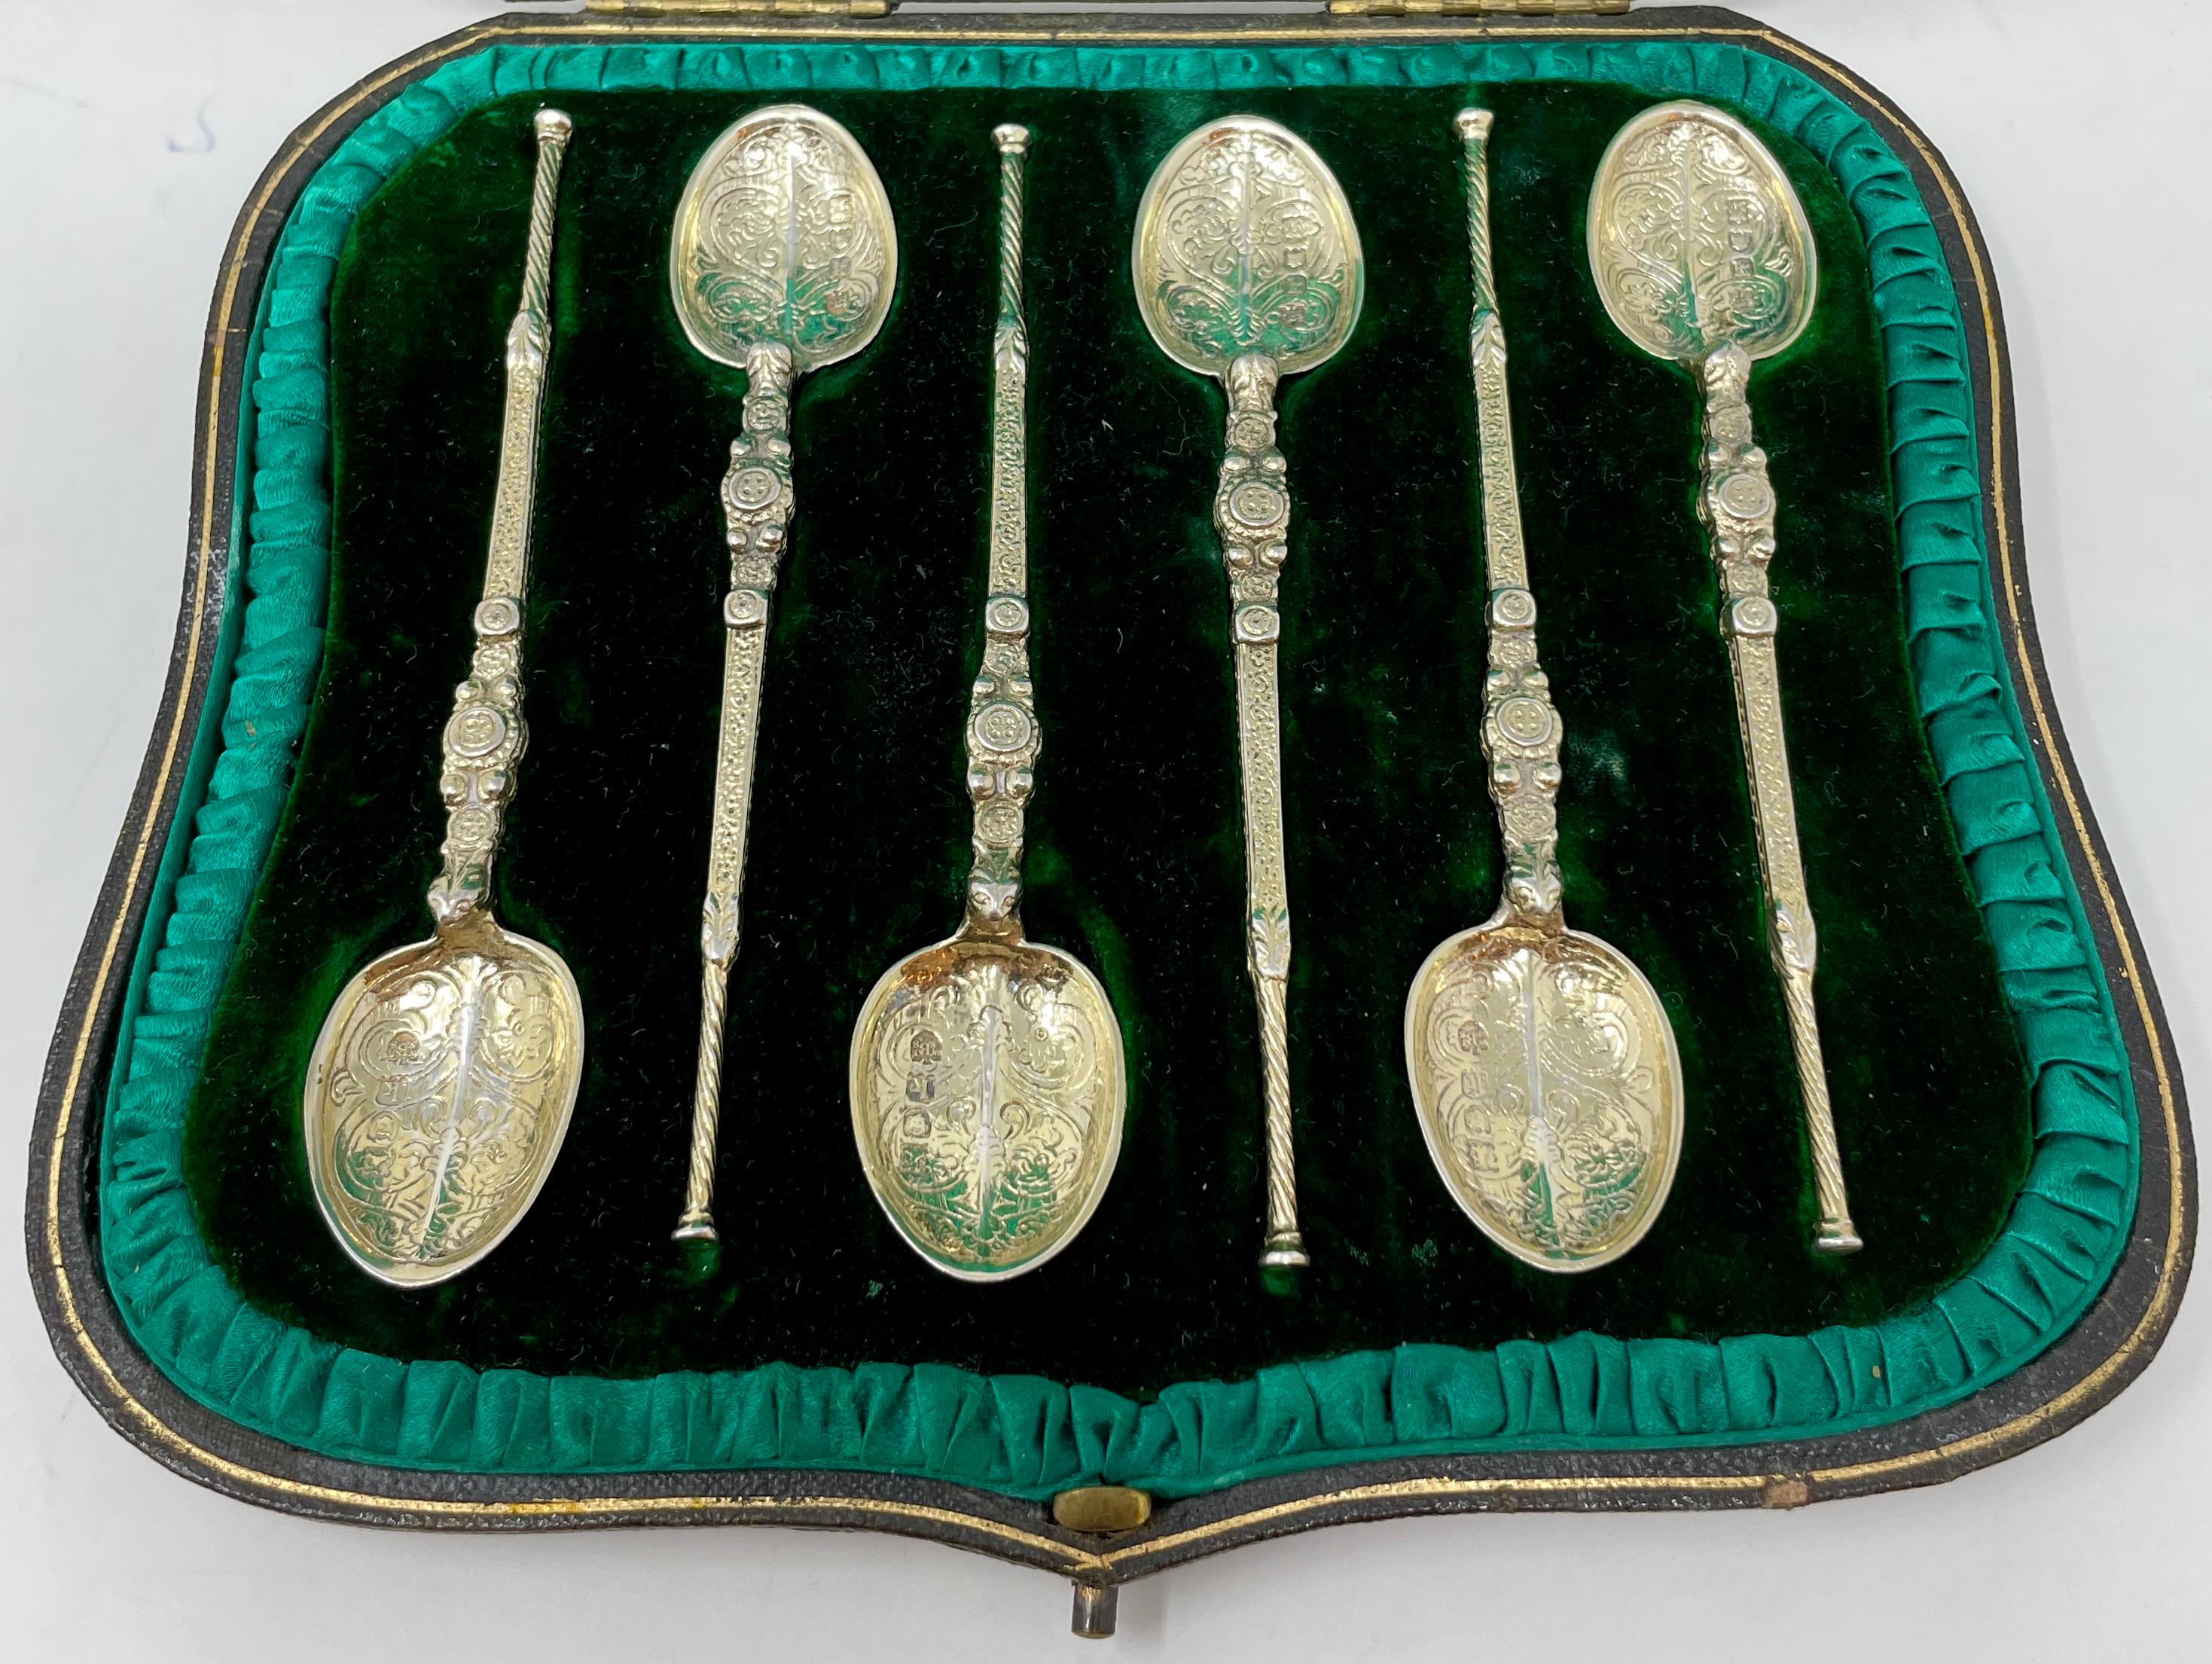 Rare set of 6 Antique English sterling silver with gold vermeil demitasse spoons in original case, circa 1915-1920. Hallmarked 